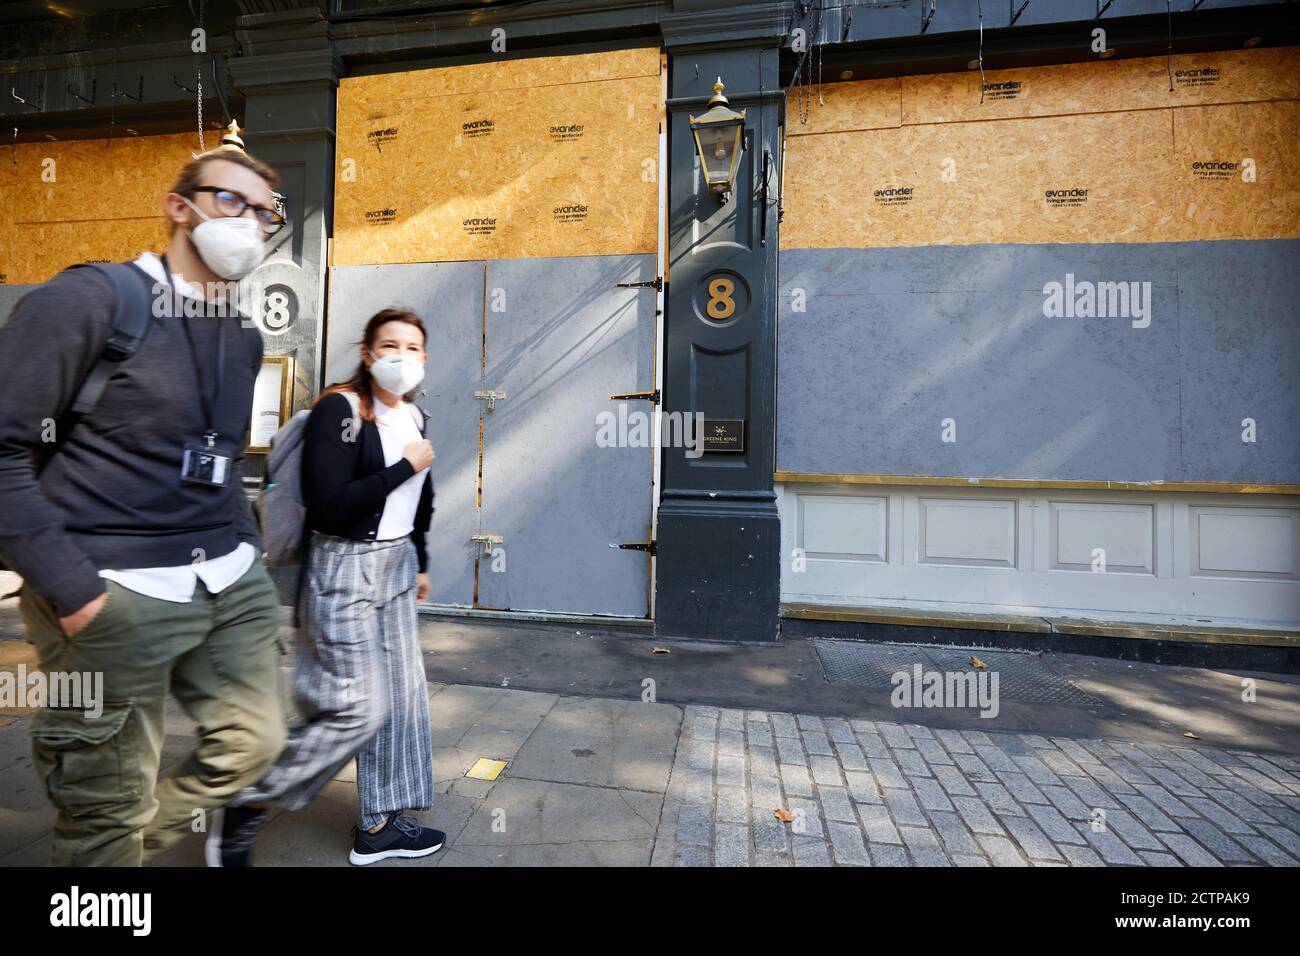 London, UK. - 21 Sept 2020: The boarded-up front of the Garick Arms pub on Charing Cross Road in central London. The Greene King pub has been shut since the start of the coronavirus pandemic. Stock Photo